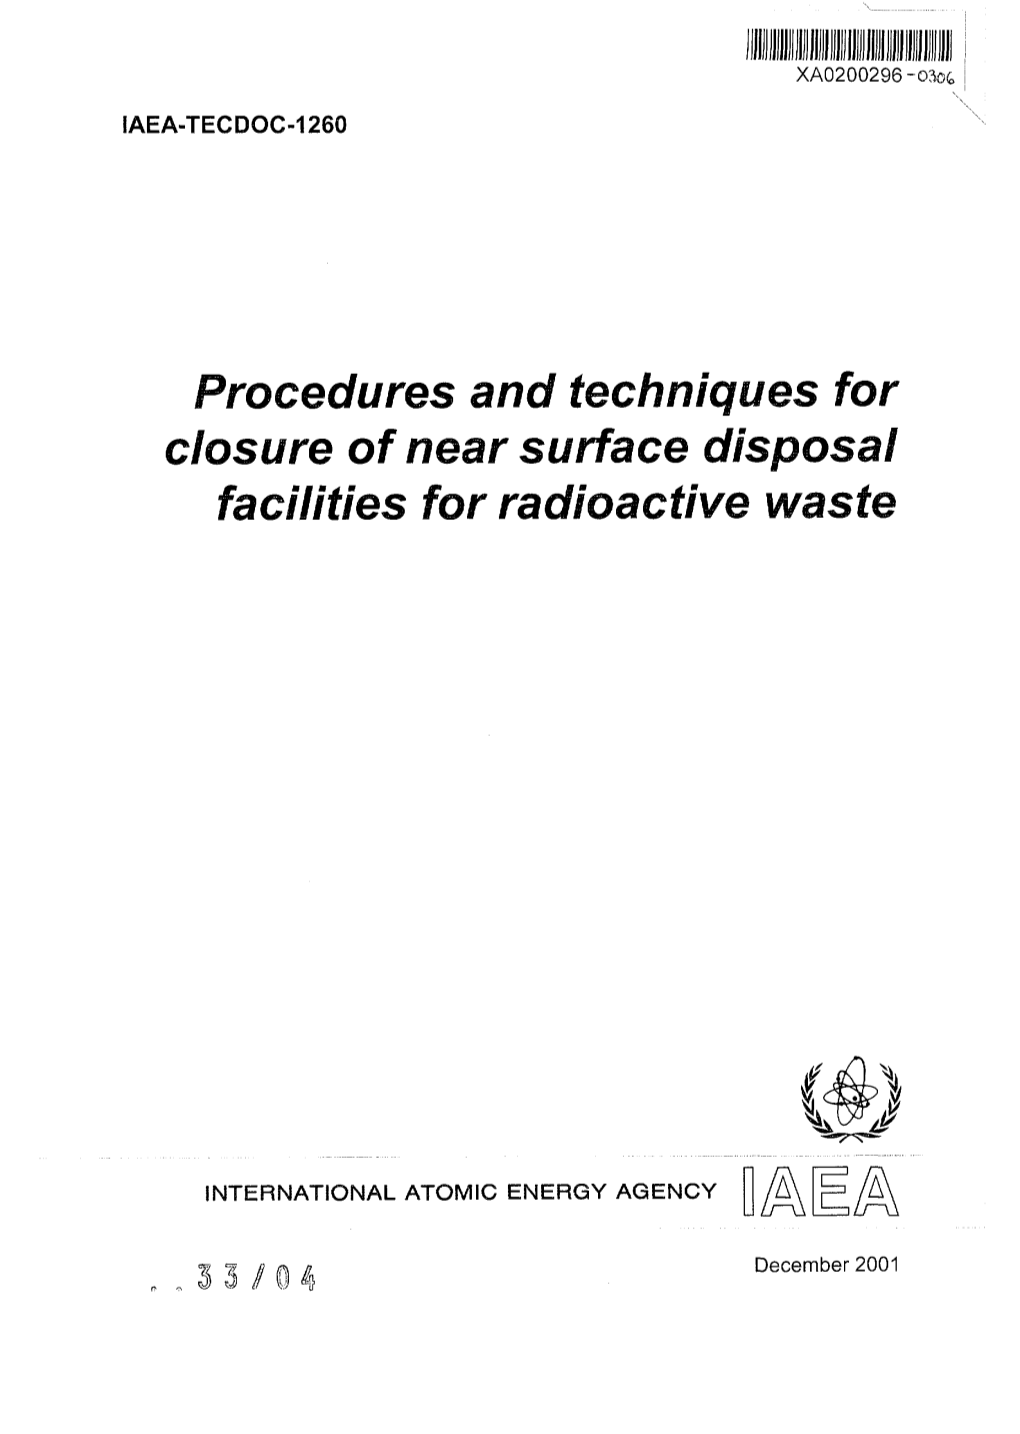 Procedures and Techniques for Closure of Near Surface Disposal Facilities for Radioactive Waste